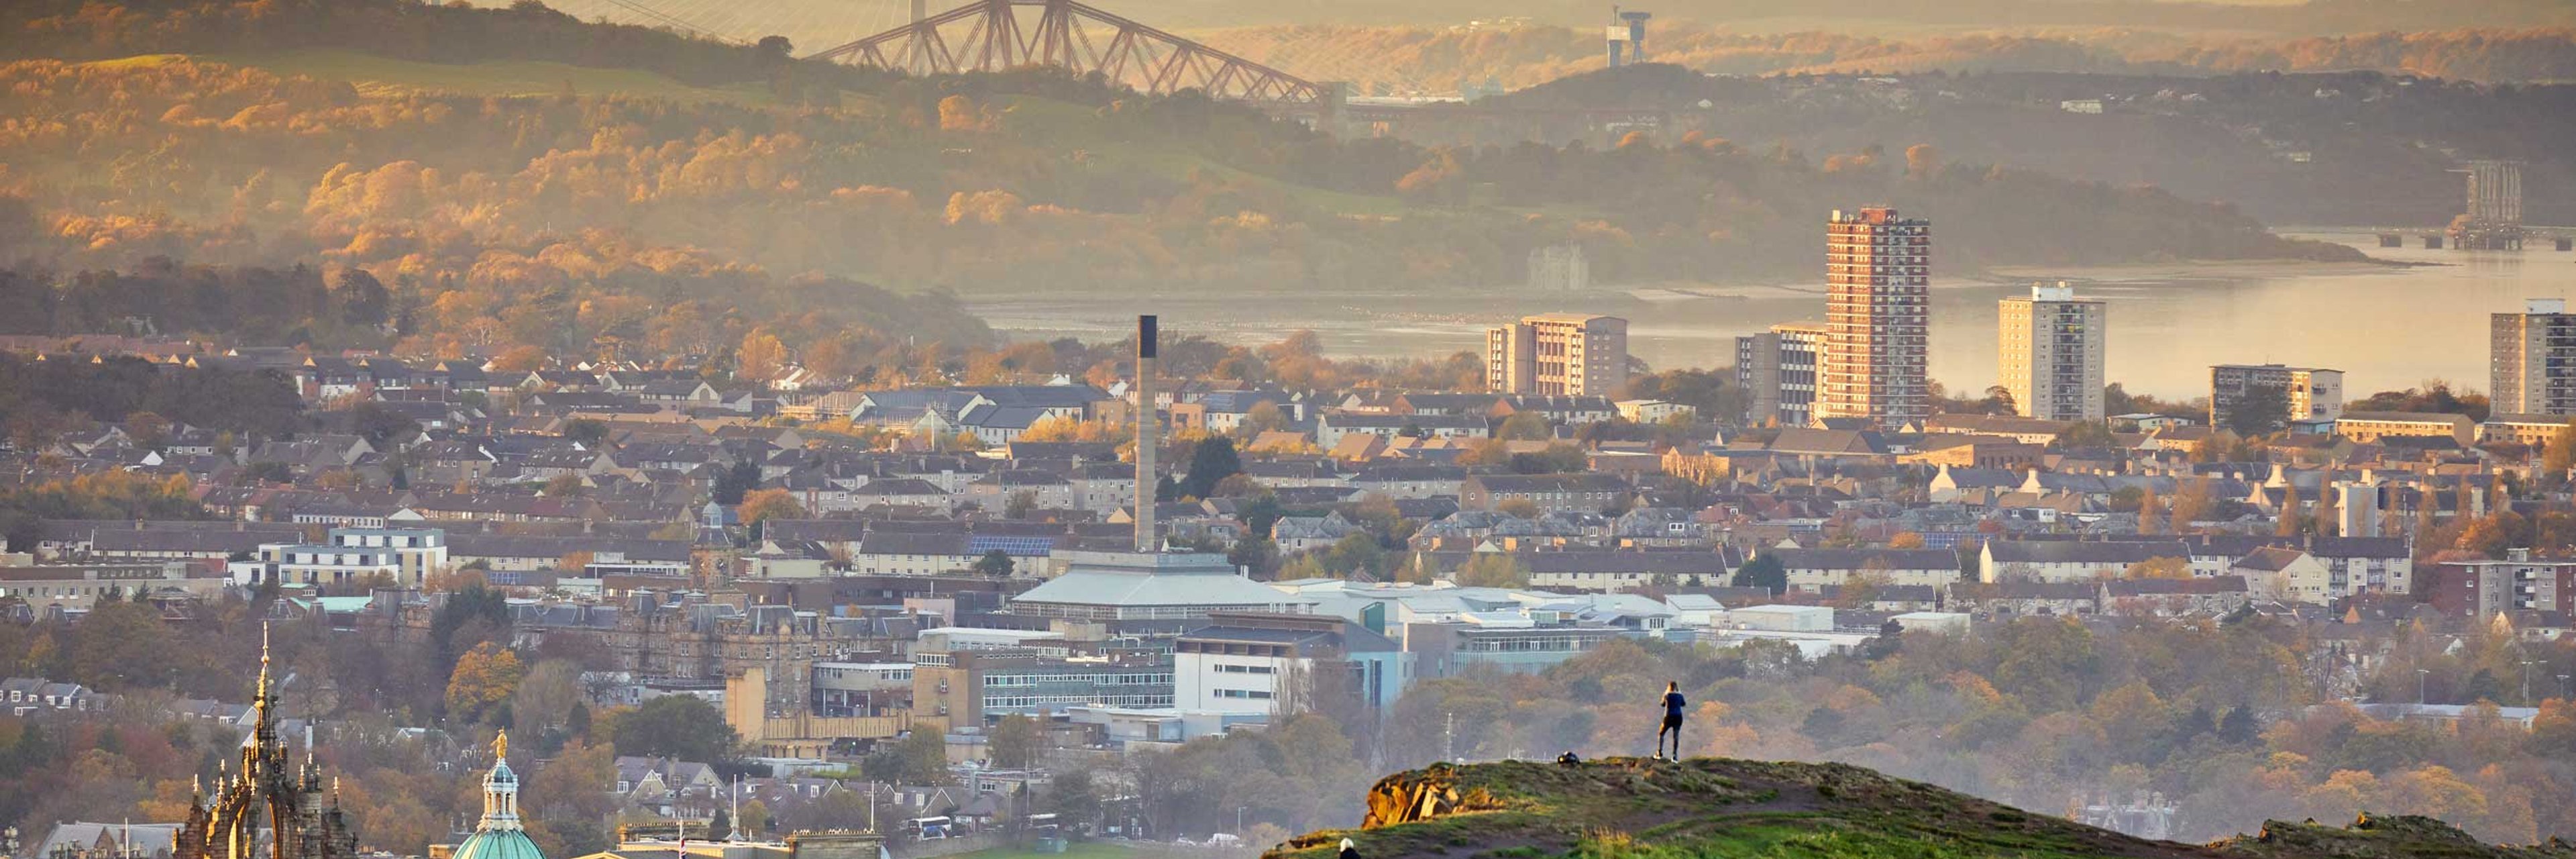 Edinburgh cityscape and skyline with Firth of Forth at sunset from Holyrood Park.